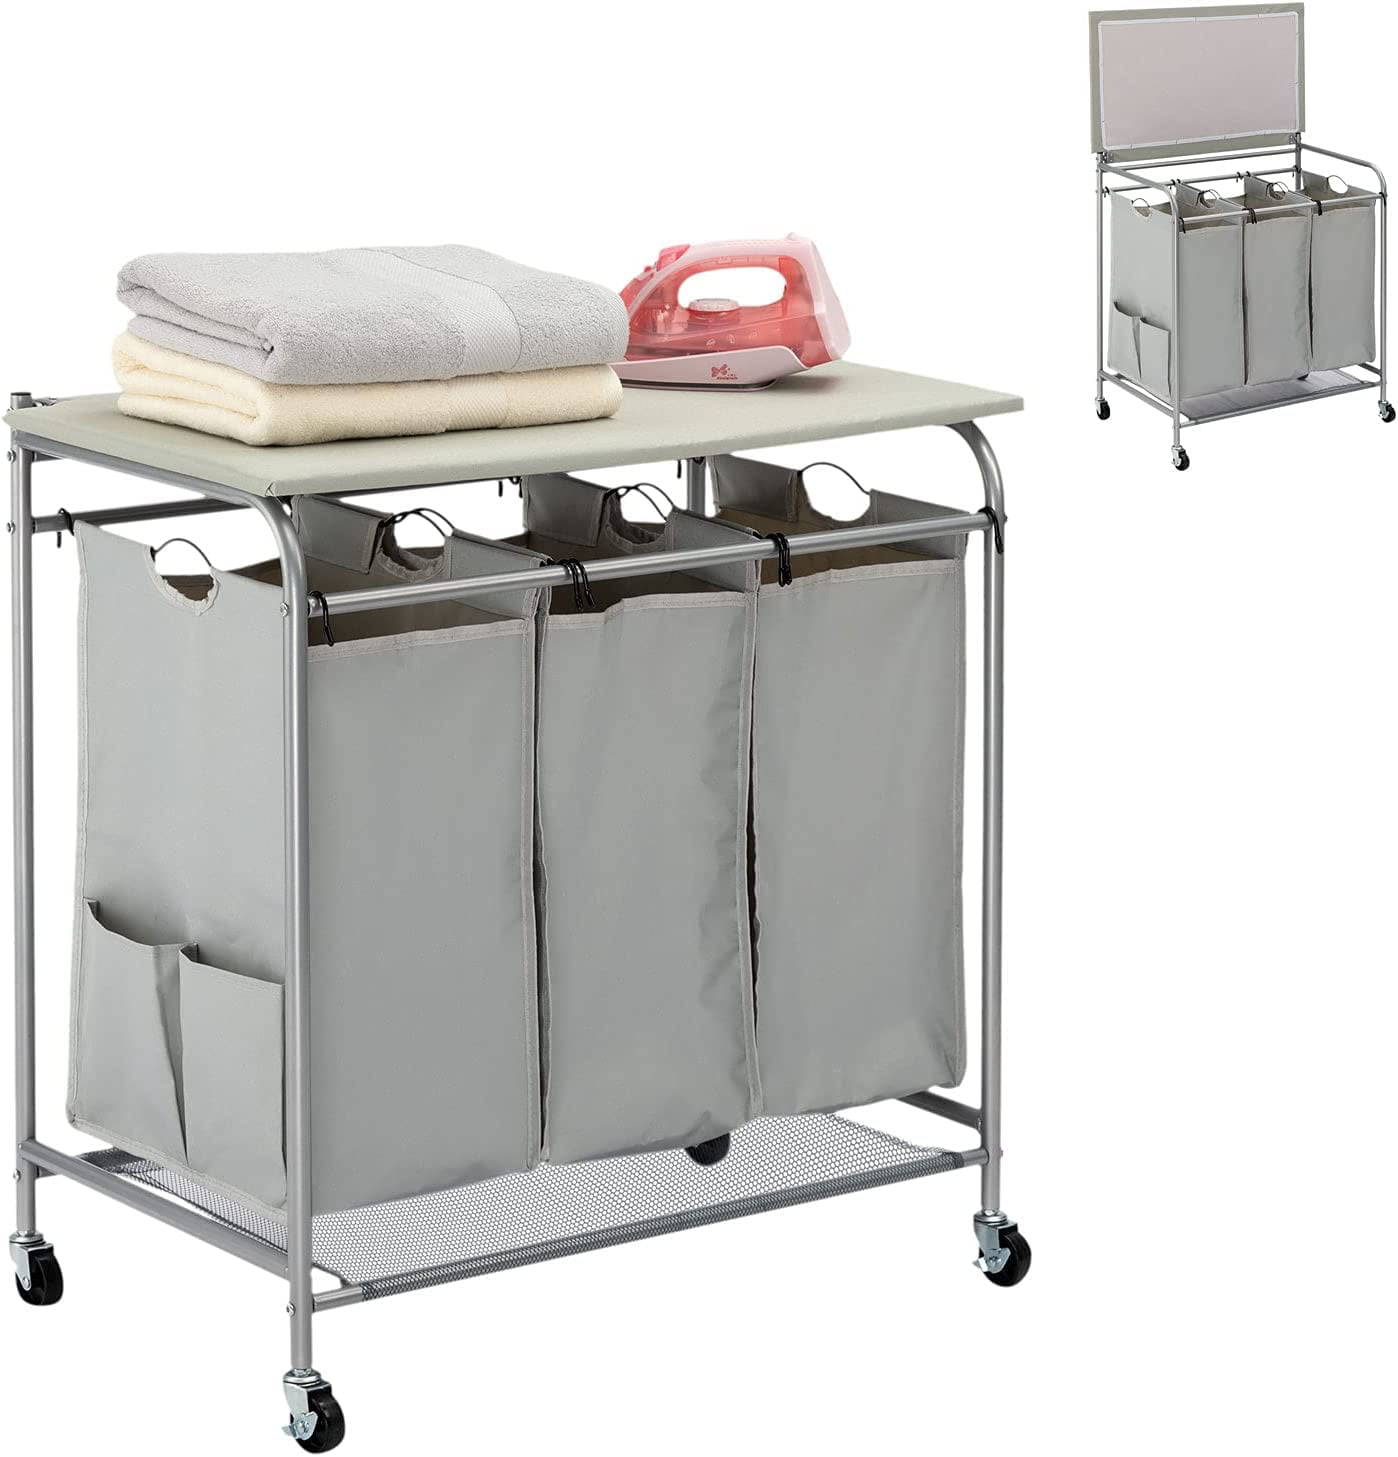 HollyHOME Laundry Sorter Cart with with Side Pull 3-Bag Ironing Board Heavy-Duty 4 Wheels Laundry Hamper Light Grey 